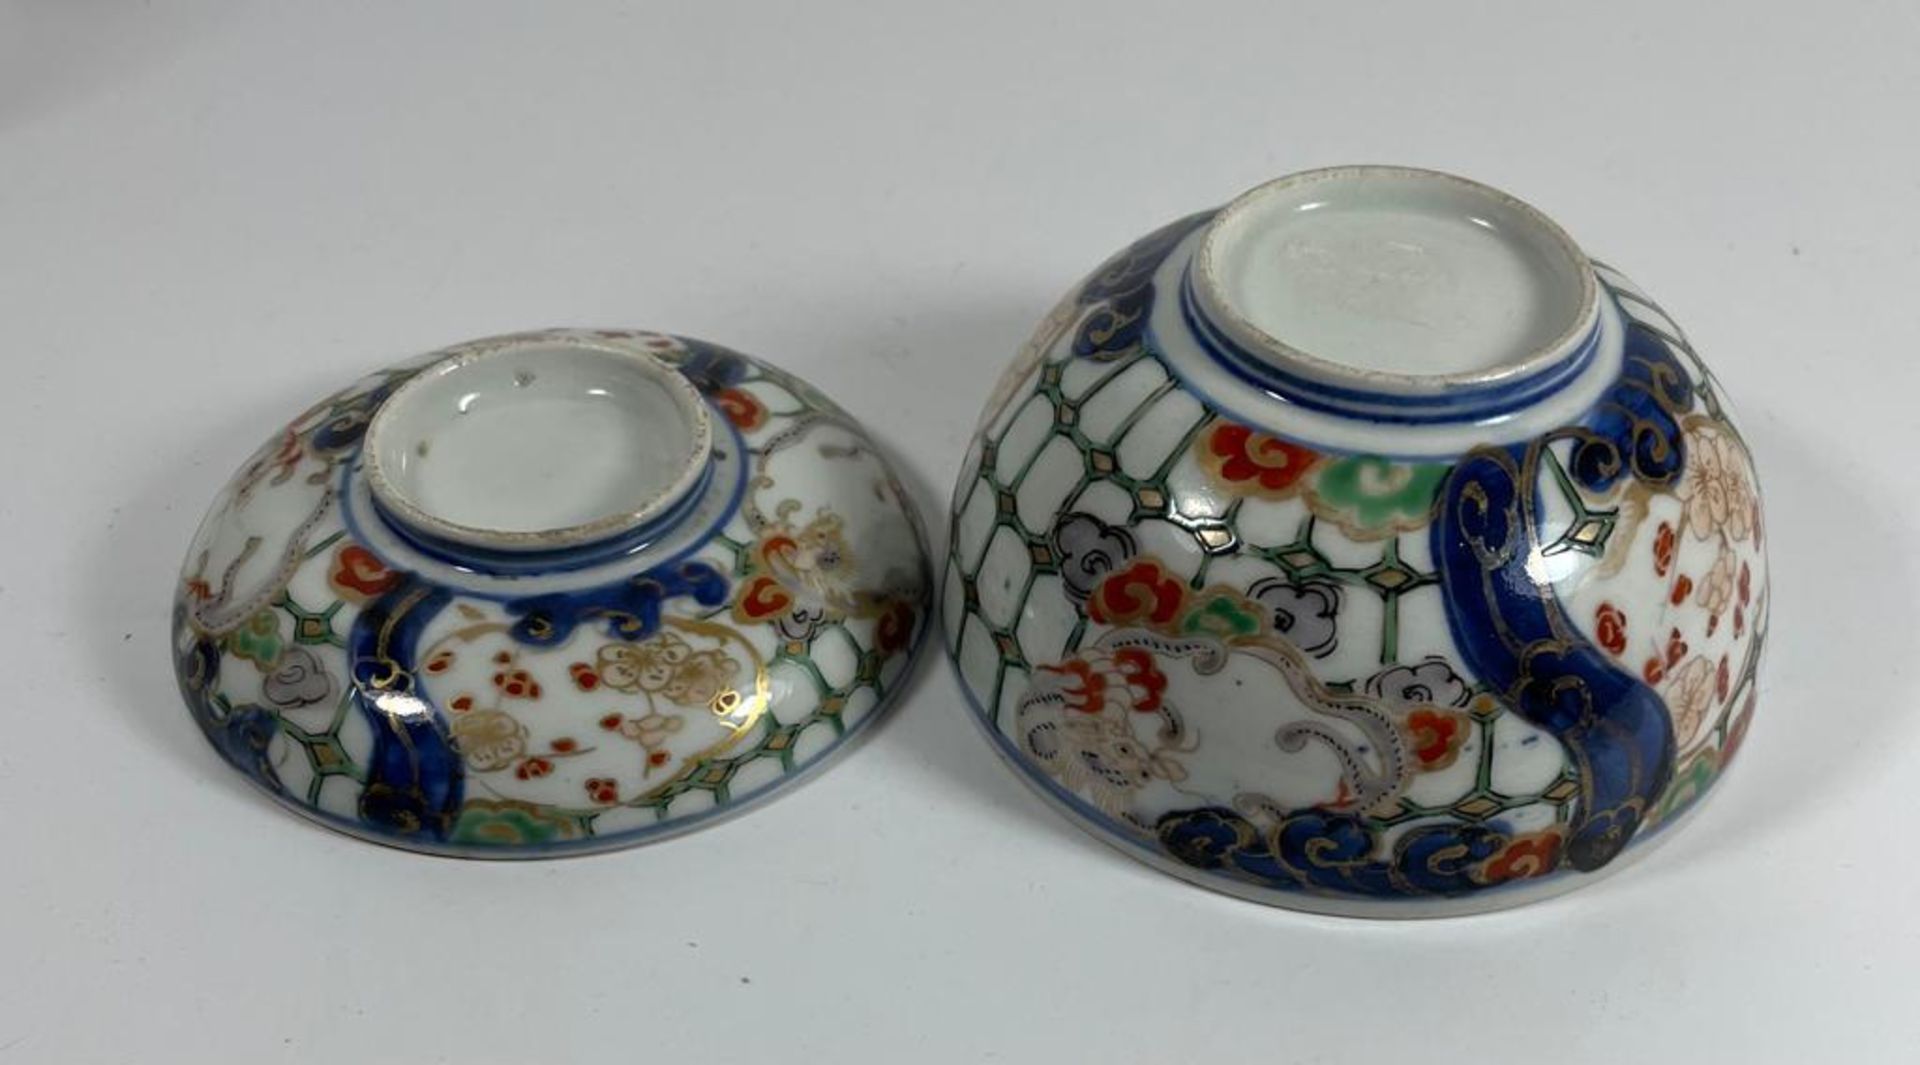 A 19TH CENTURY JAPANESE IMARI DRAGON BOWL AND MATCHING SAUCER, BOTH WITH MATCHING MOTIFS AND DESIGN, - Image 3 of 4